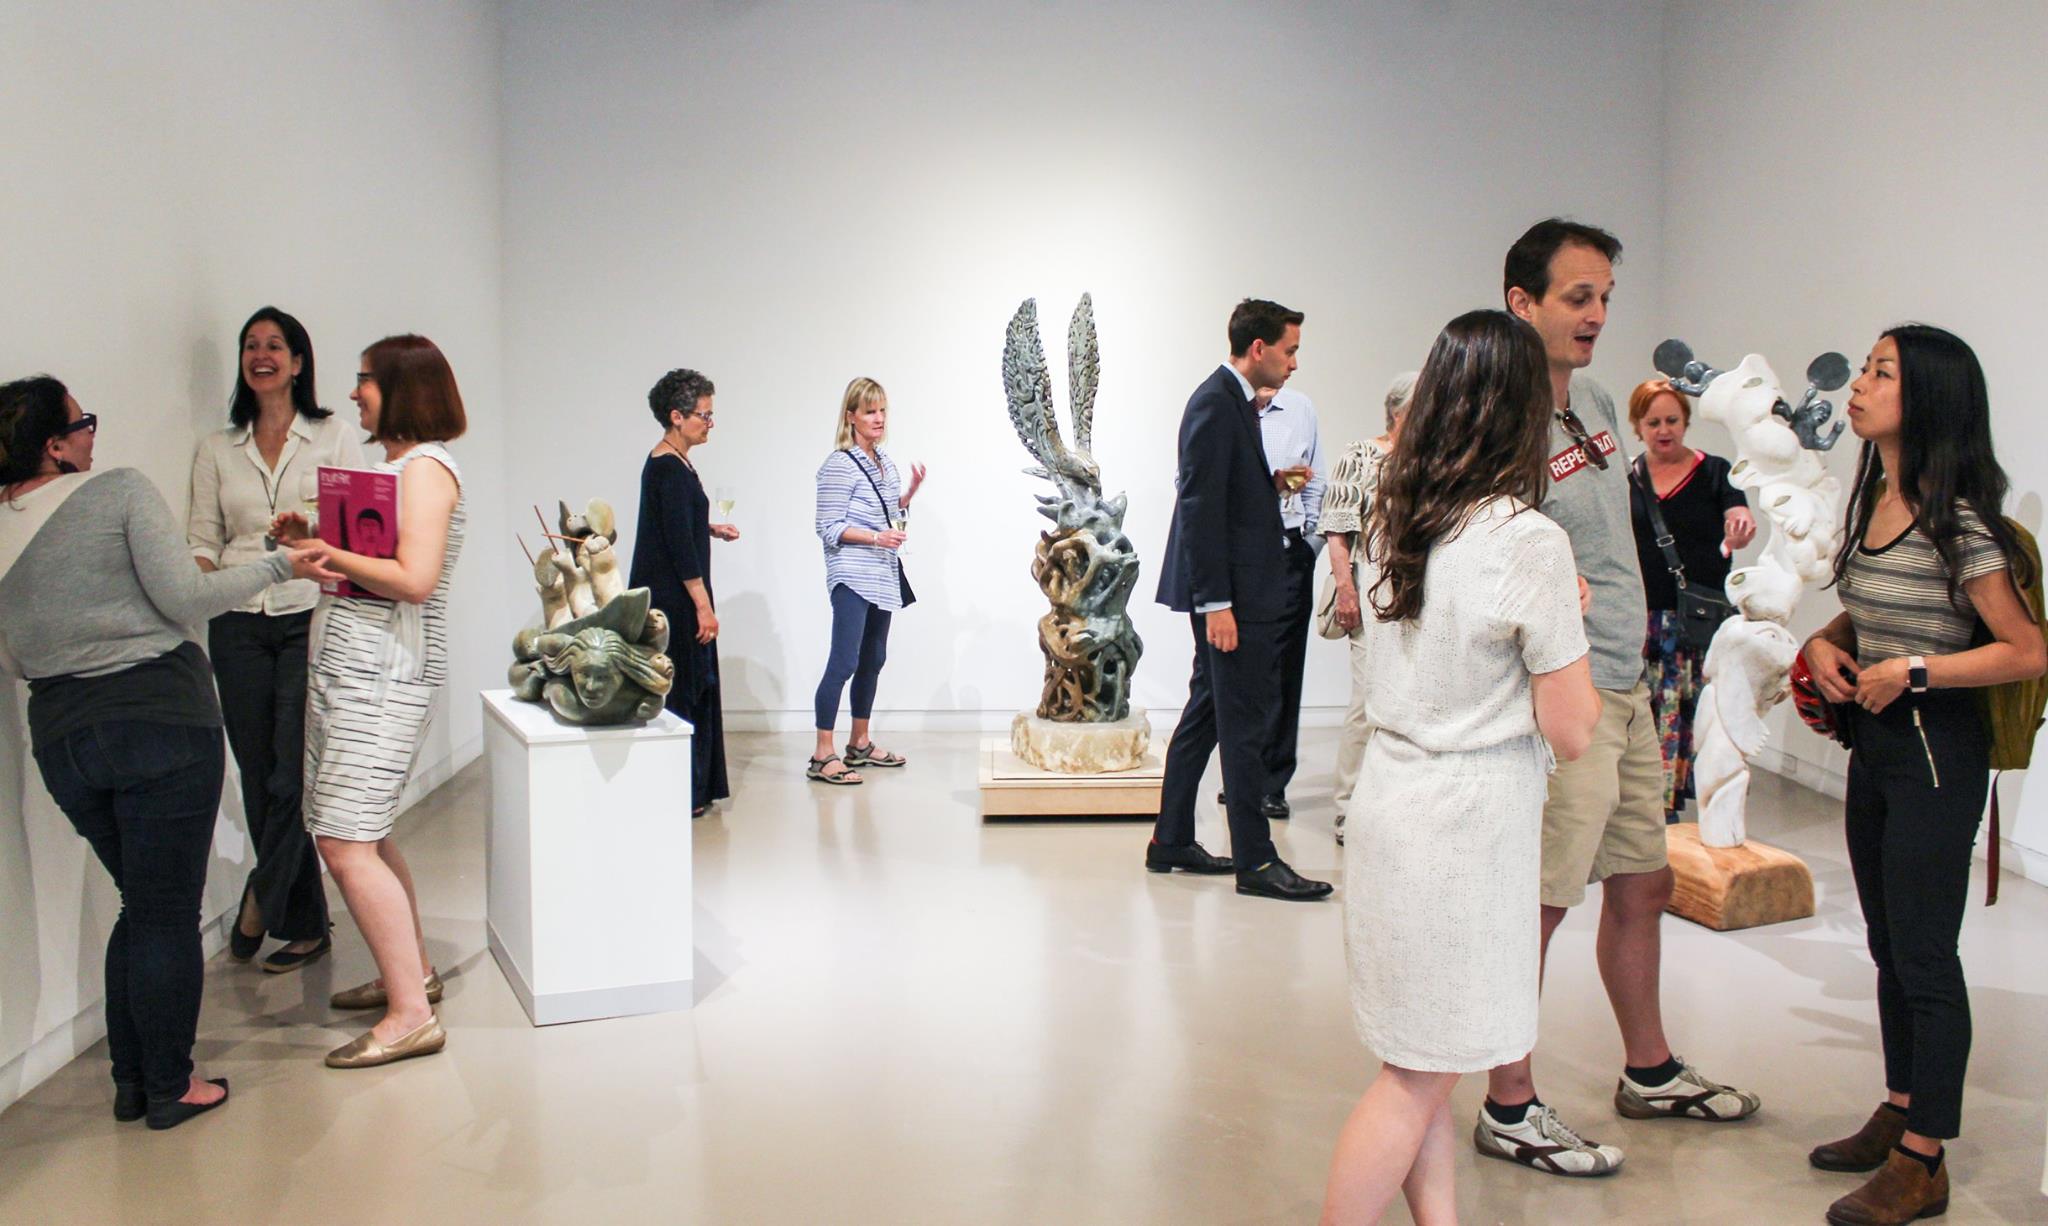 Guests attend the opening of Abraham Anghik Ruben's exhibition at Feheley Fine Arts in Toronto